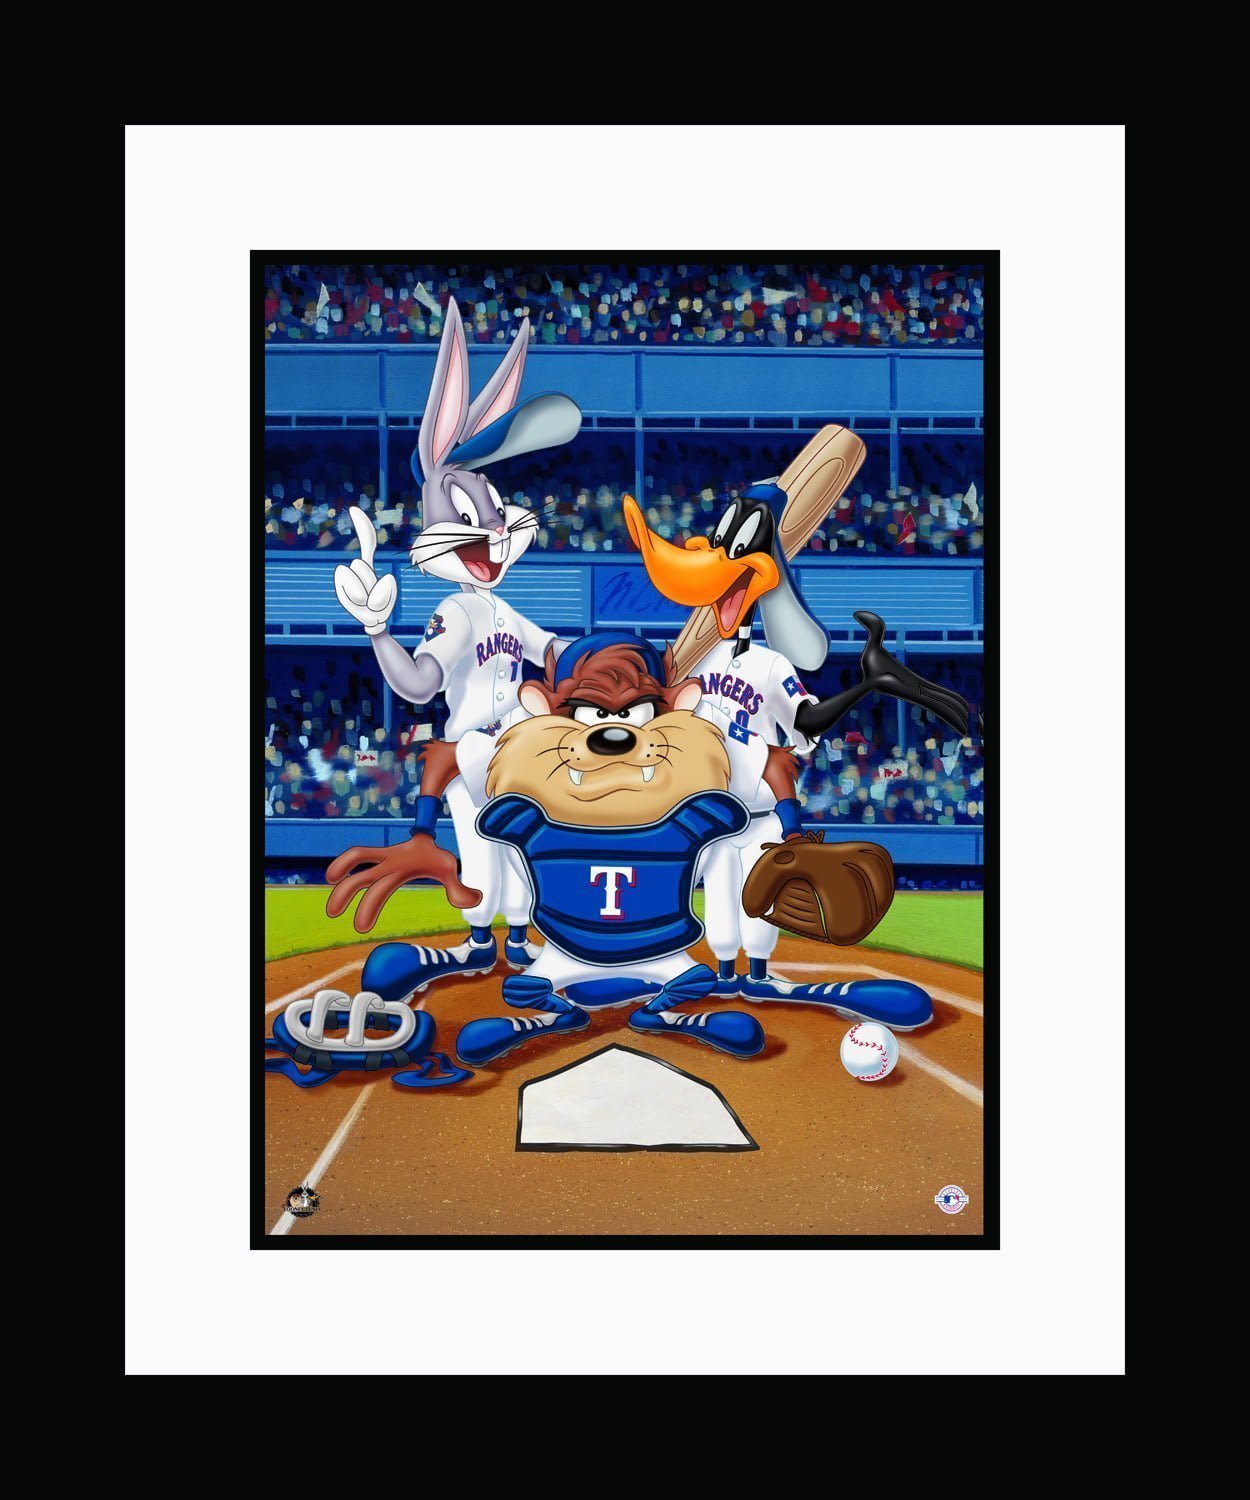 Texas Rangers Mouse Pad All MLB Teams Available 